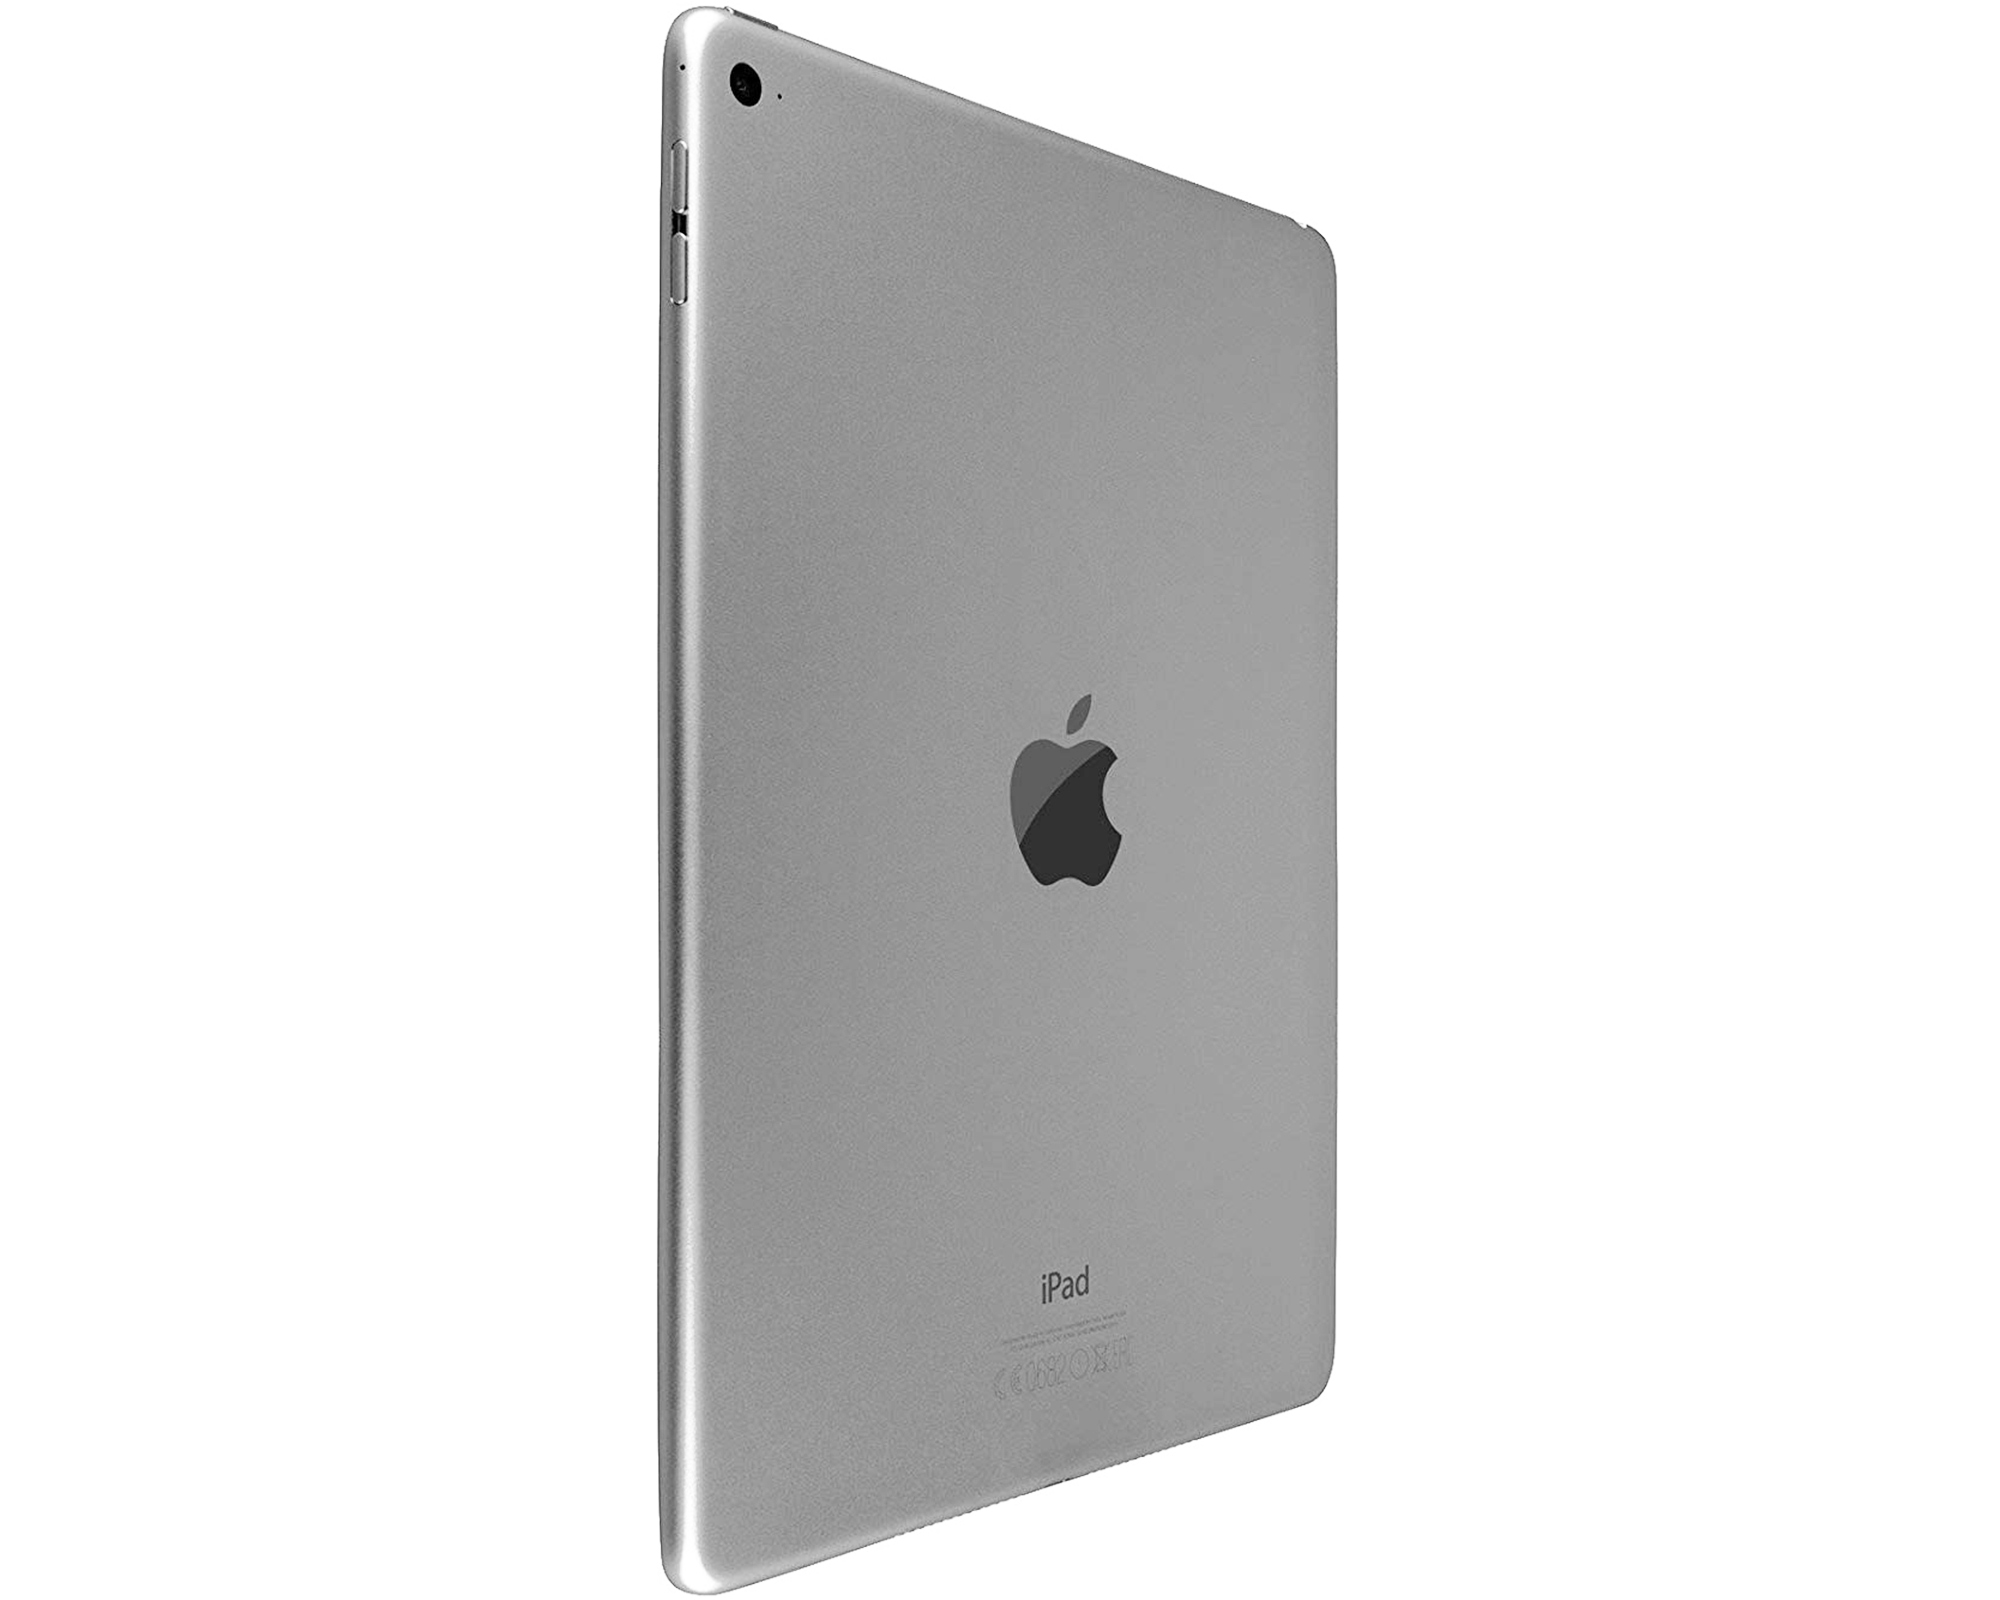 Restored Apple iPad Air 9.7" Retina Display 32GB WiFi Tablet - Space Gray - MD786LL/A (Refurbished) - image 5 of 5